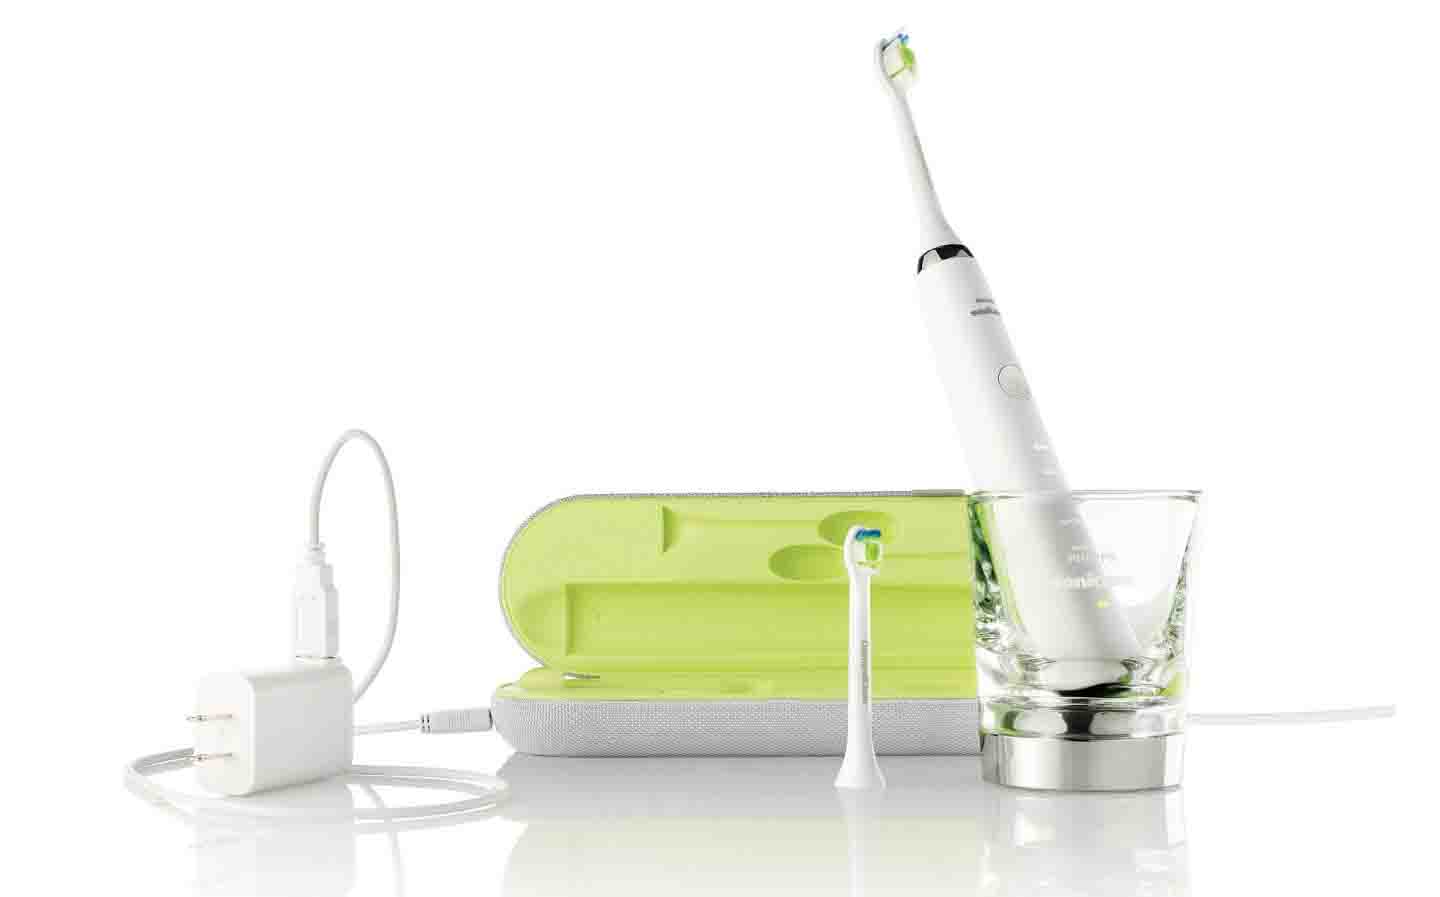 BURST Sonic Toothbrush review - The Gadgeteer